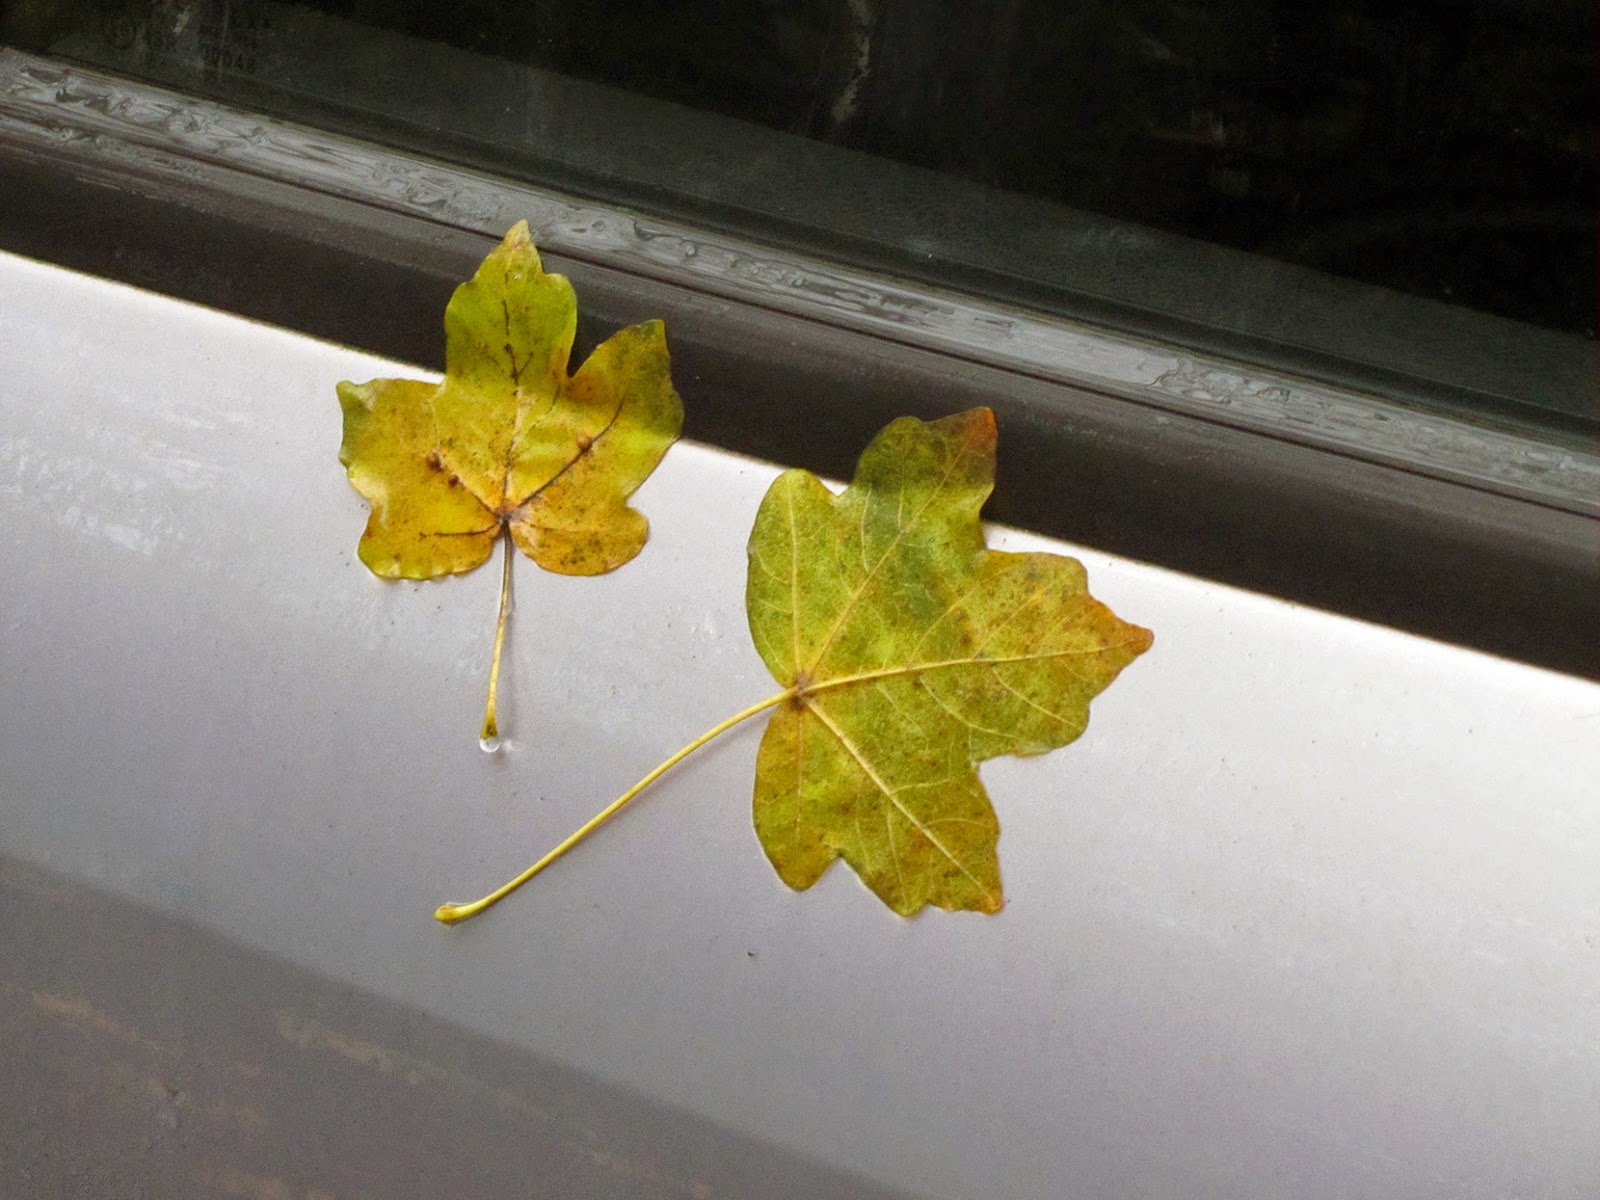 two leaves stuck on a silver car